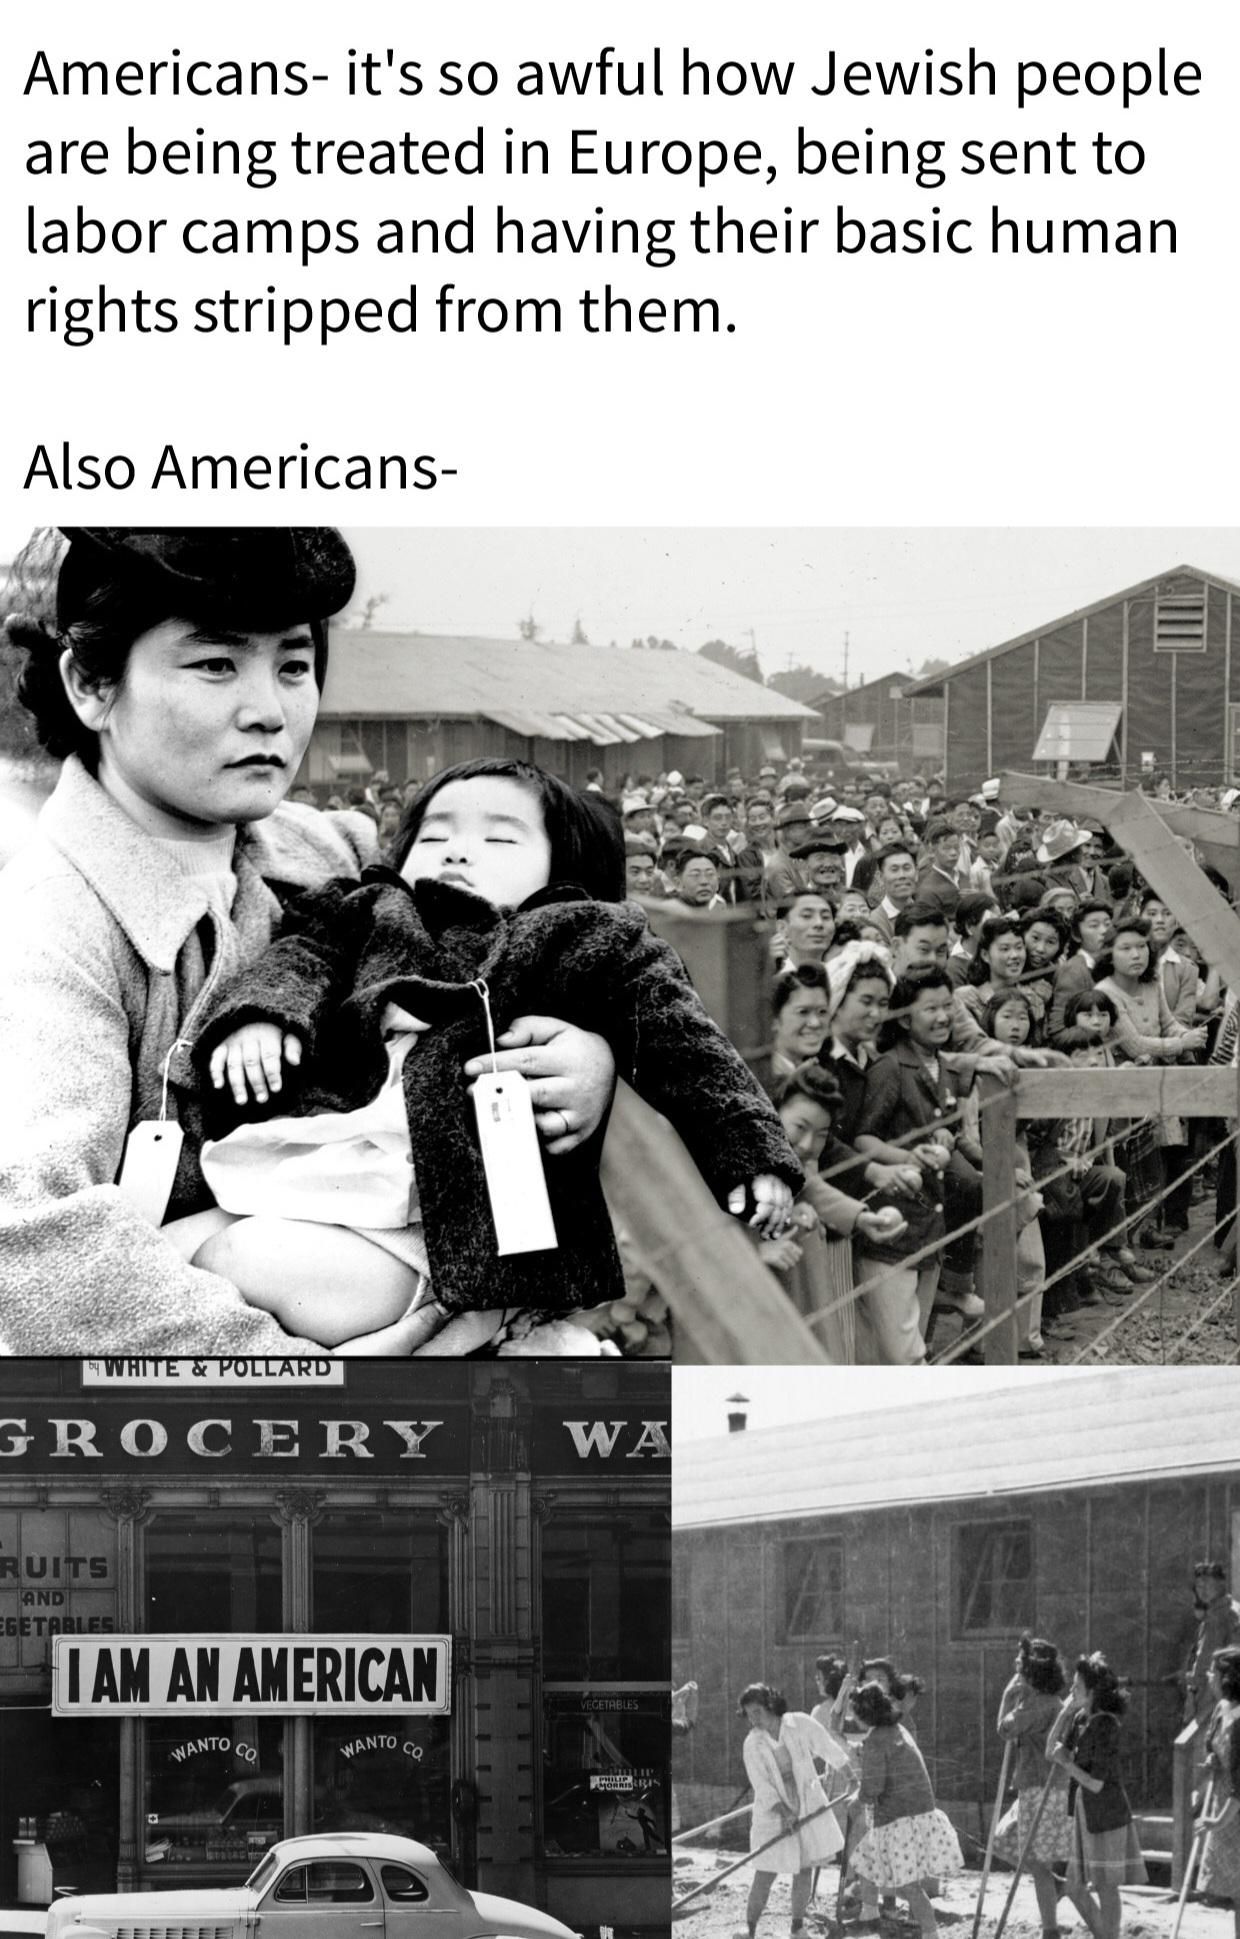 Roosevelt's legacy- sending Japanese men women and children to internment camps.